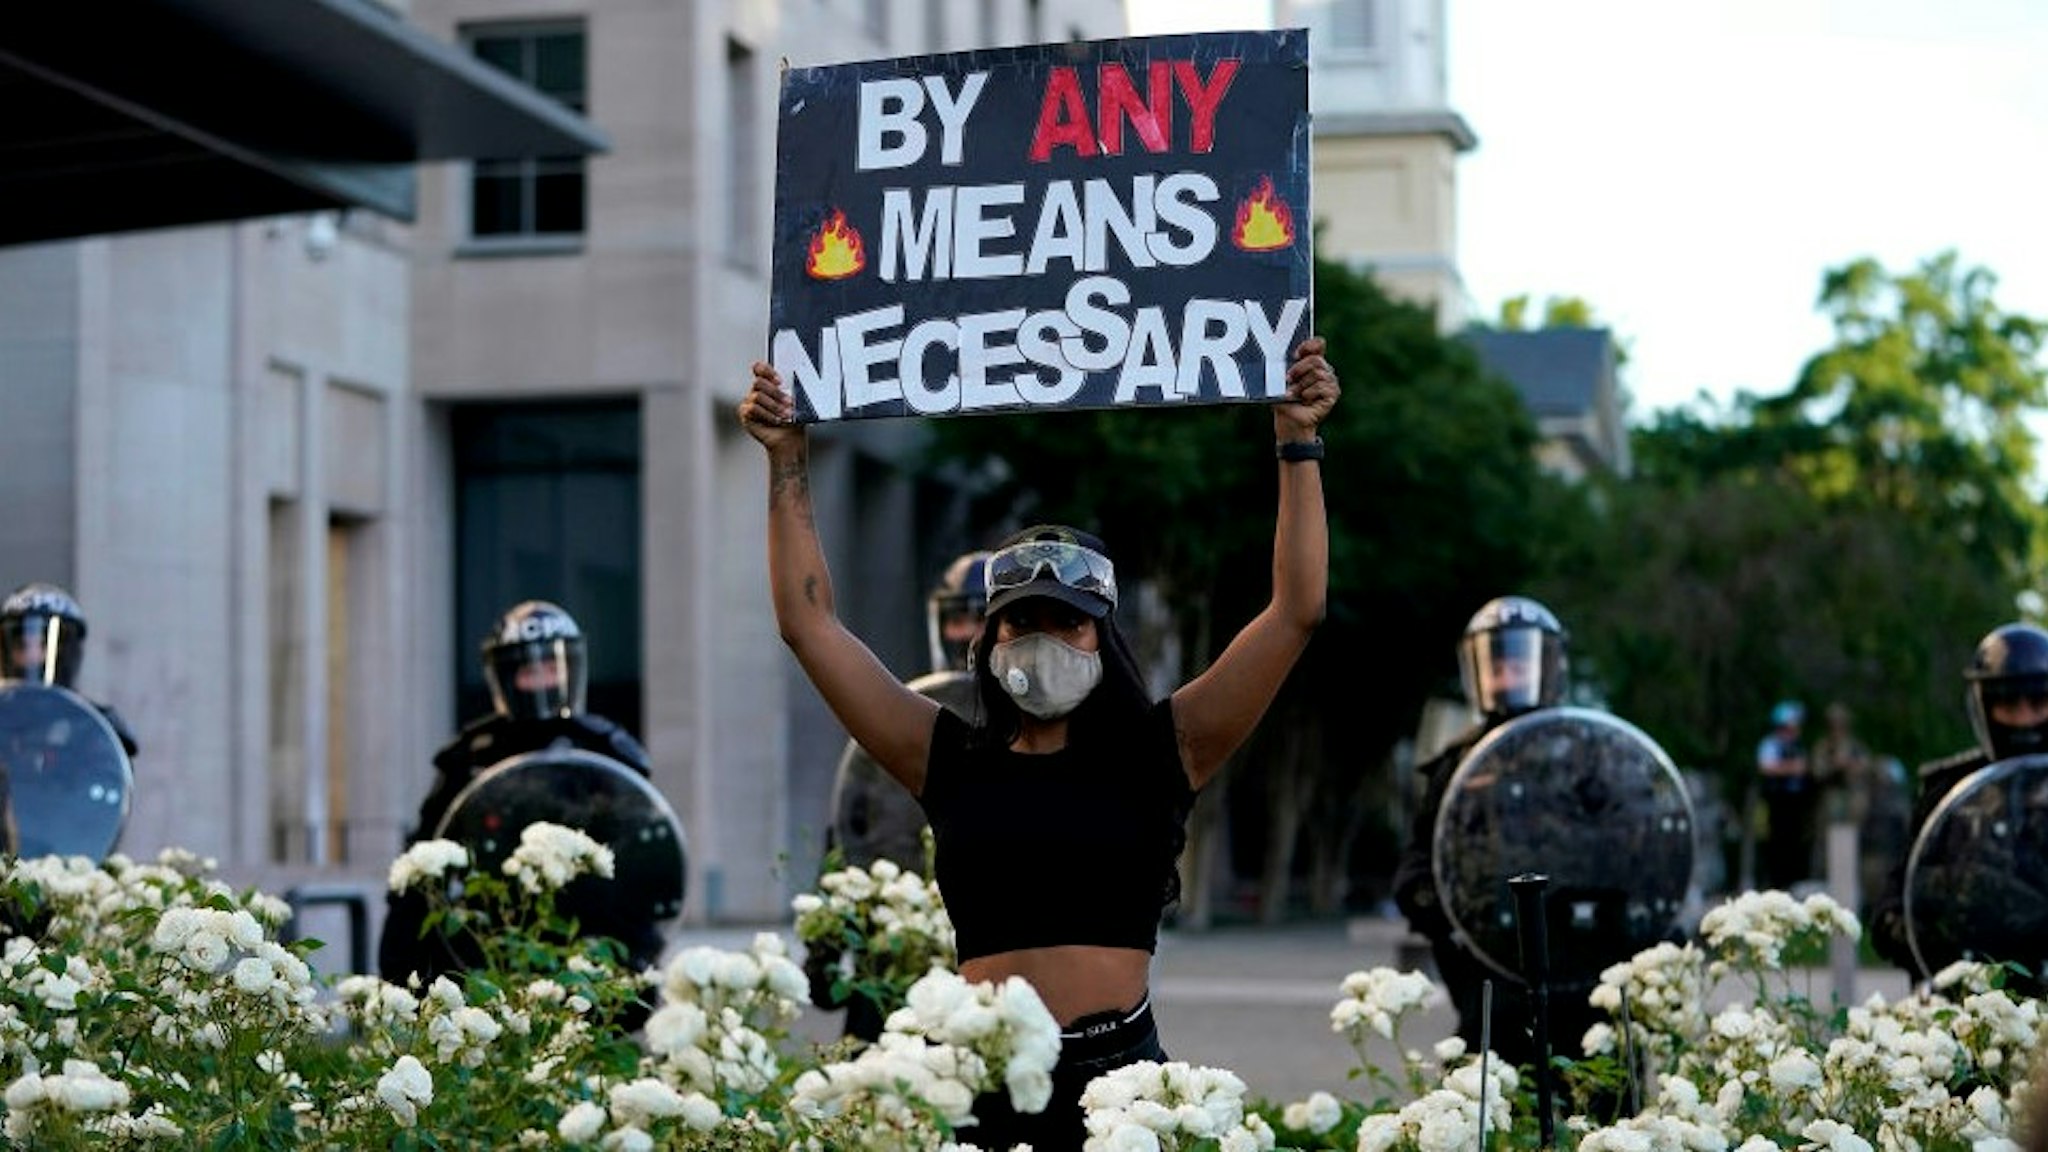 WASHINGTON, DC - JUNE 01: A demonstrator holds up a sign in front of a police line during protest on June 1, 2020 in downtown Washington, DC. Protests and riots continue in cities across America following the death of George Floyd, who died after being restrained by Minneapolis police officer Derek Chauvin. Chauvin, 44, was charged last Friday with third-degree murder and second-degree manslaughter. (Photo by